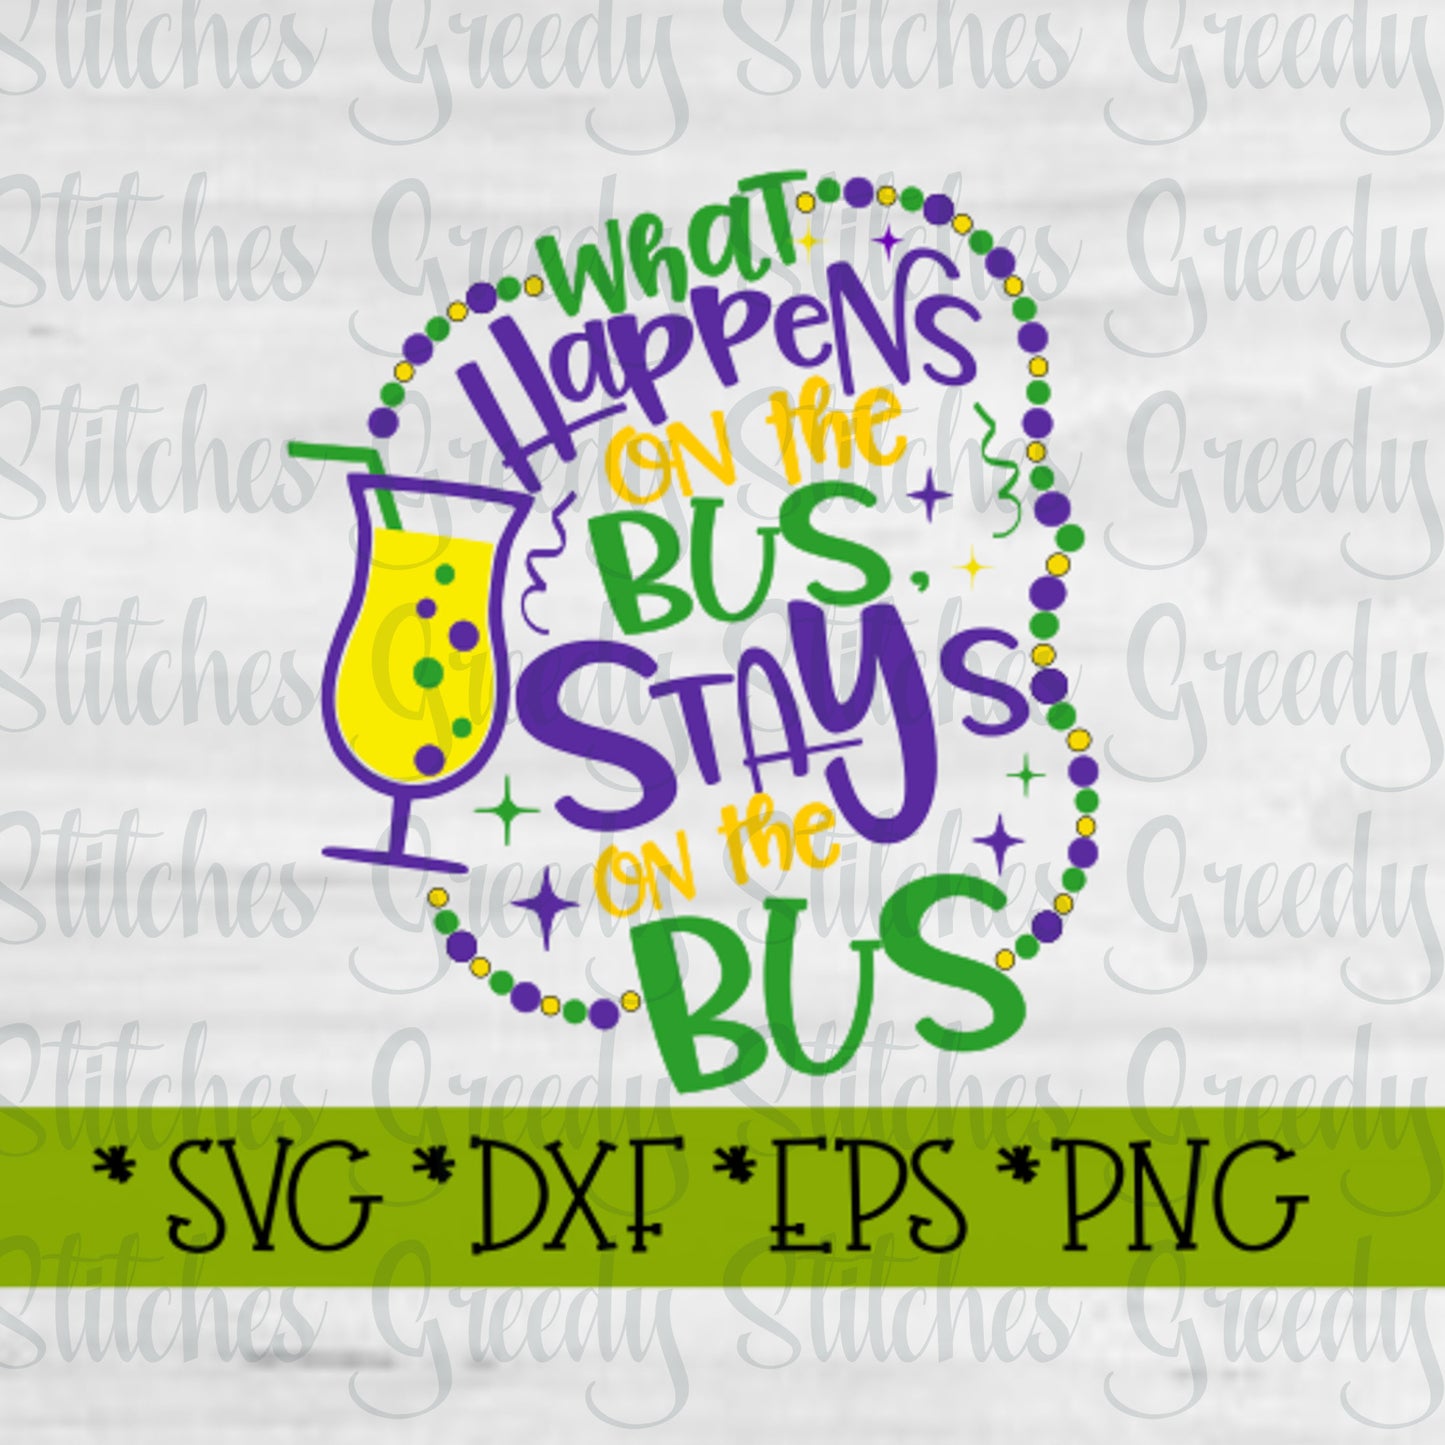 Mardi Gras, What Happens On The Bus, Stays On The Bus svg, dxf, eps, & png. Mardi Gras SvG | Mardi Gras Bus SvG  | Instant Download Cut File